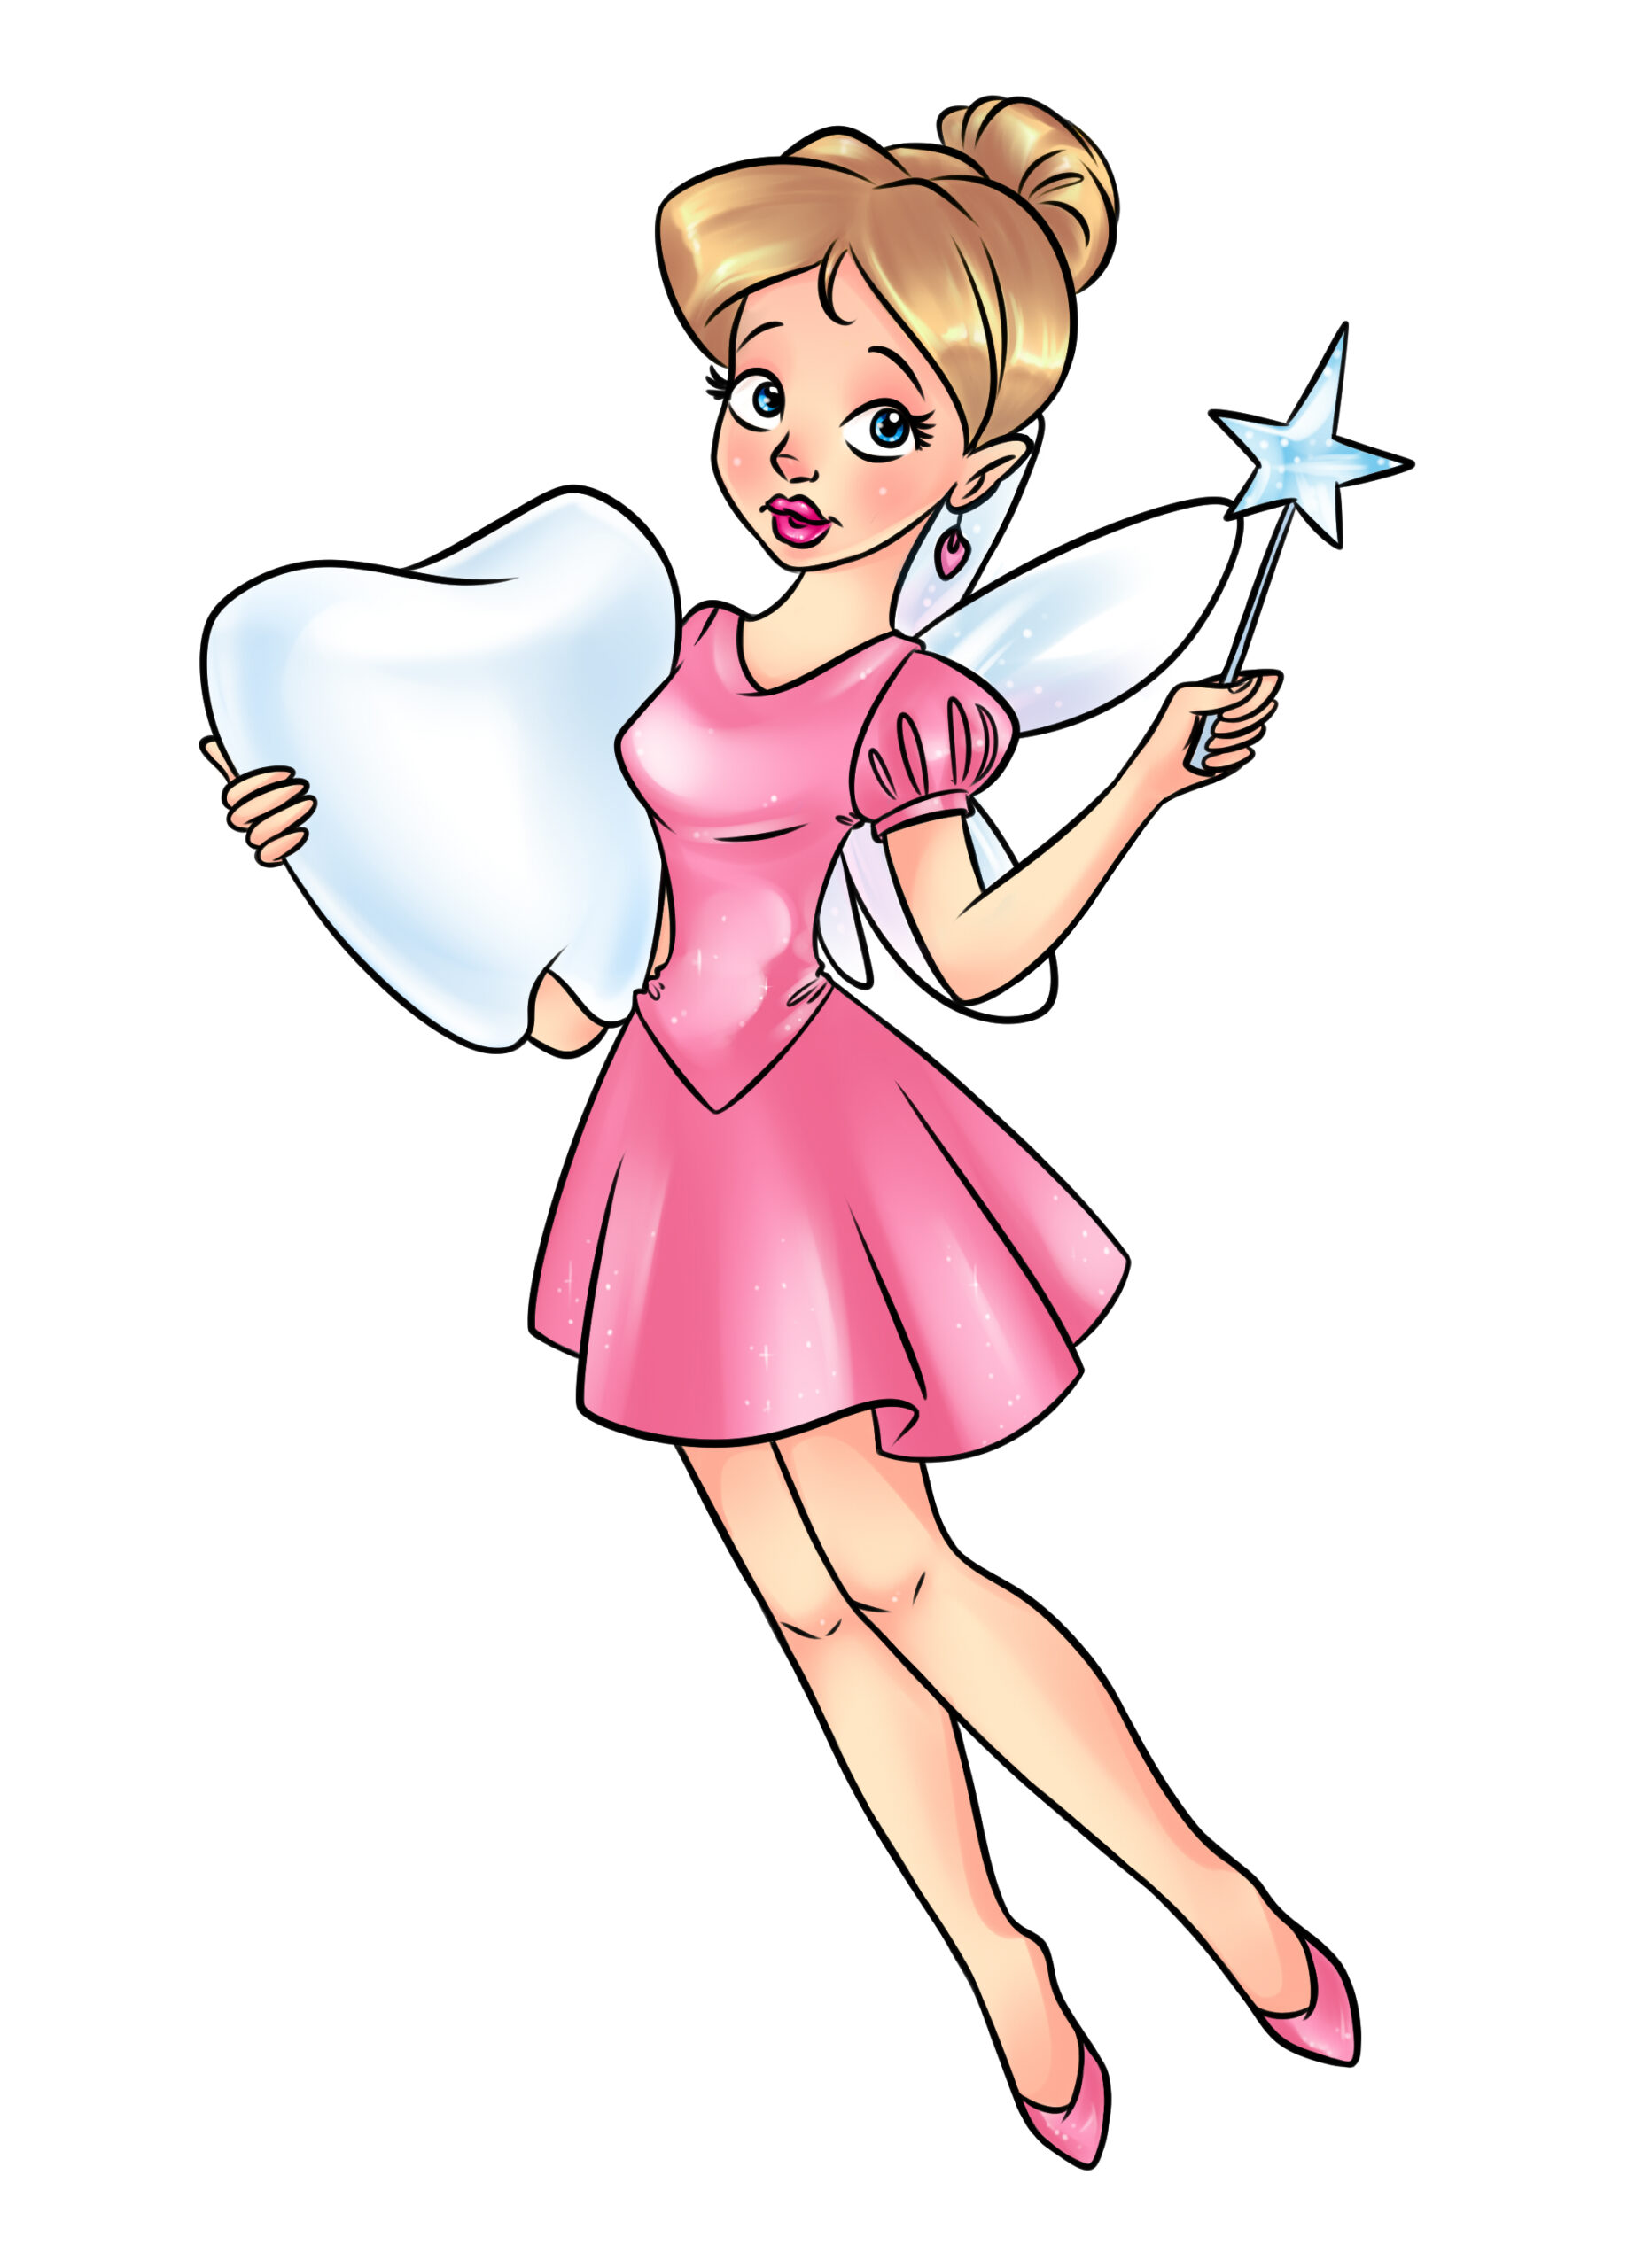 5 Awesome Facts About The Tooth Fairy